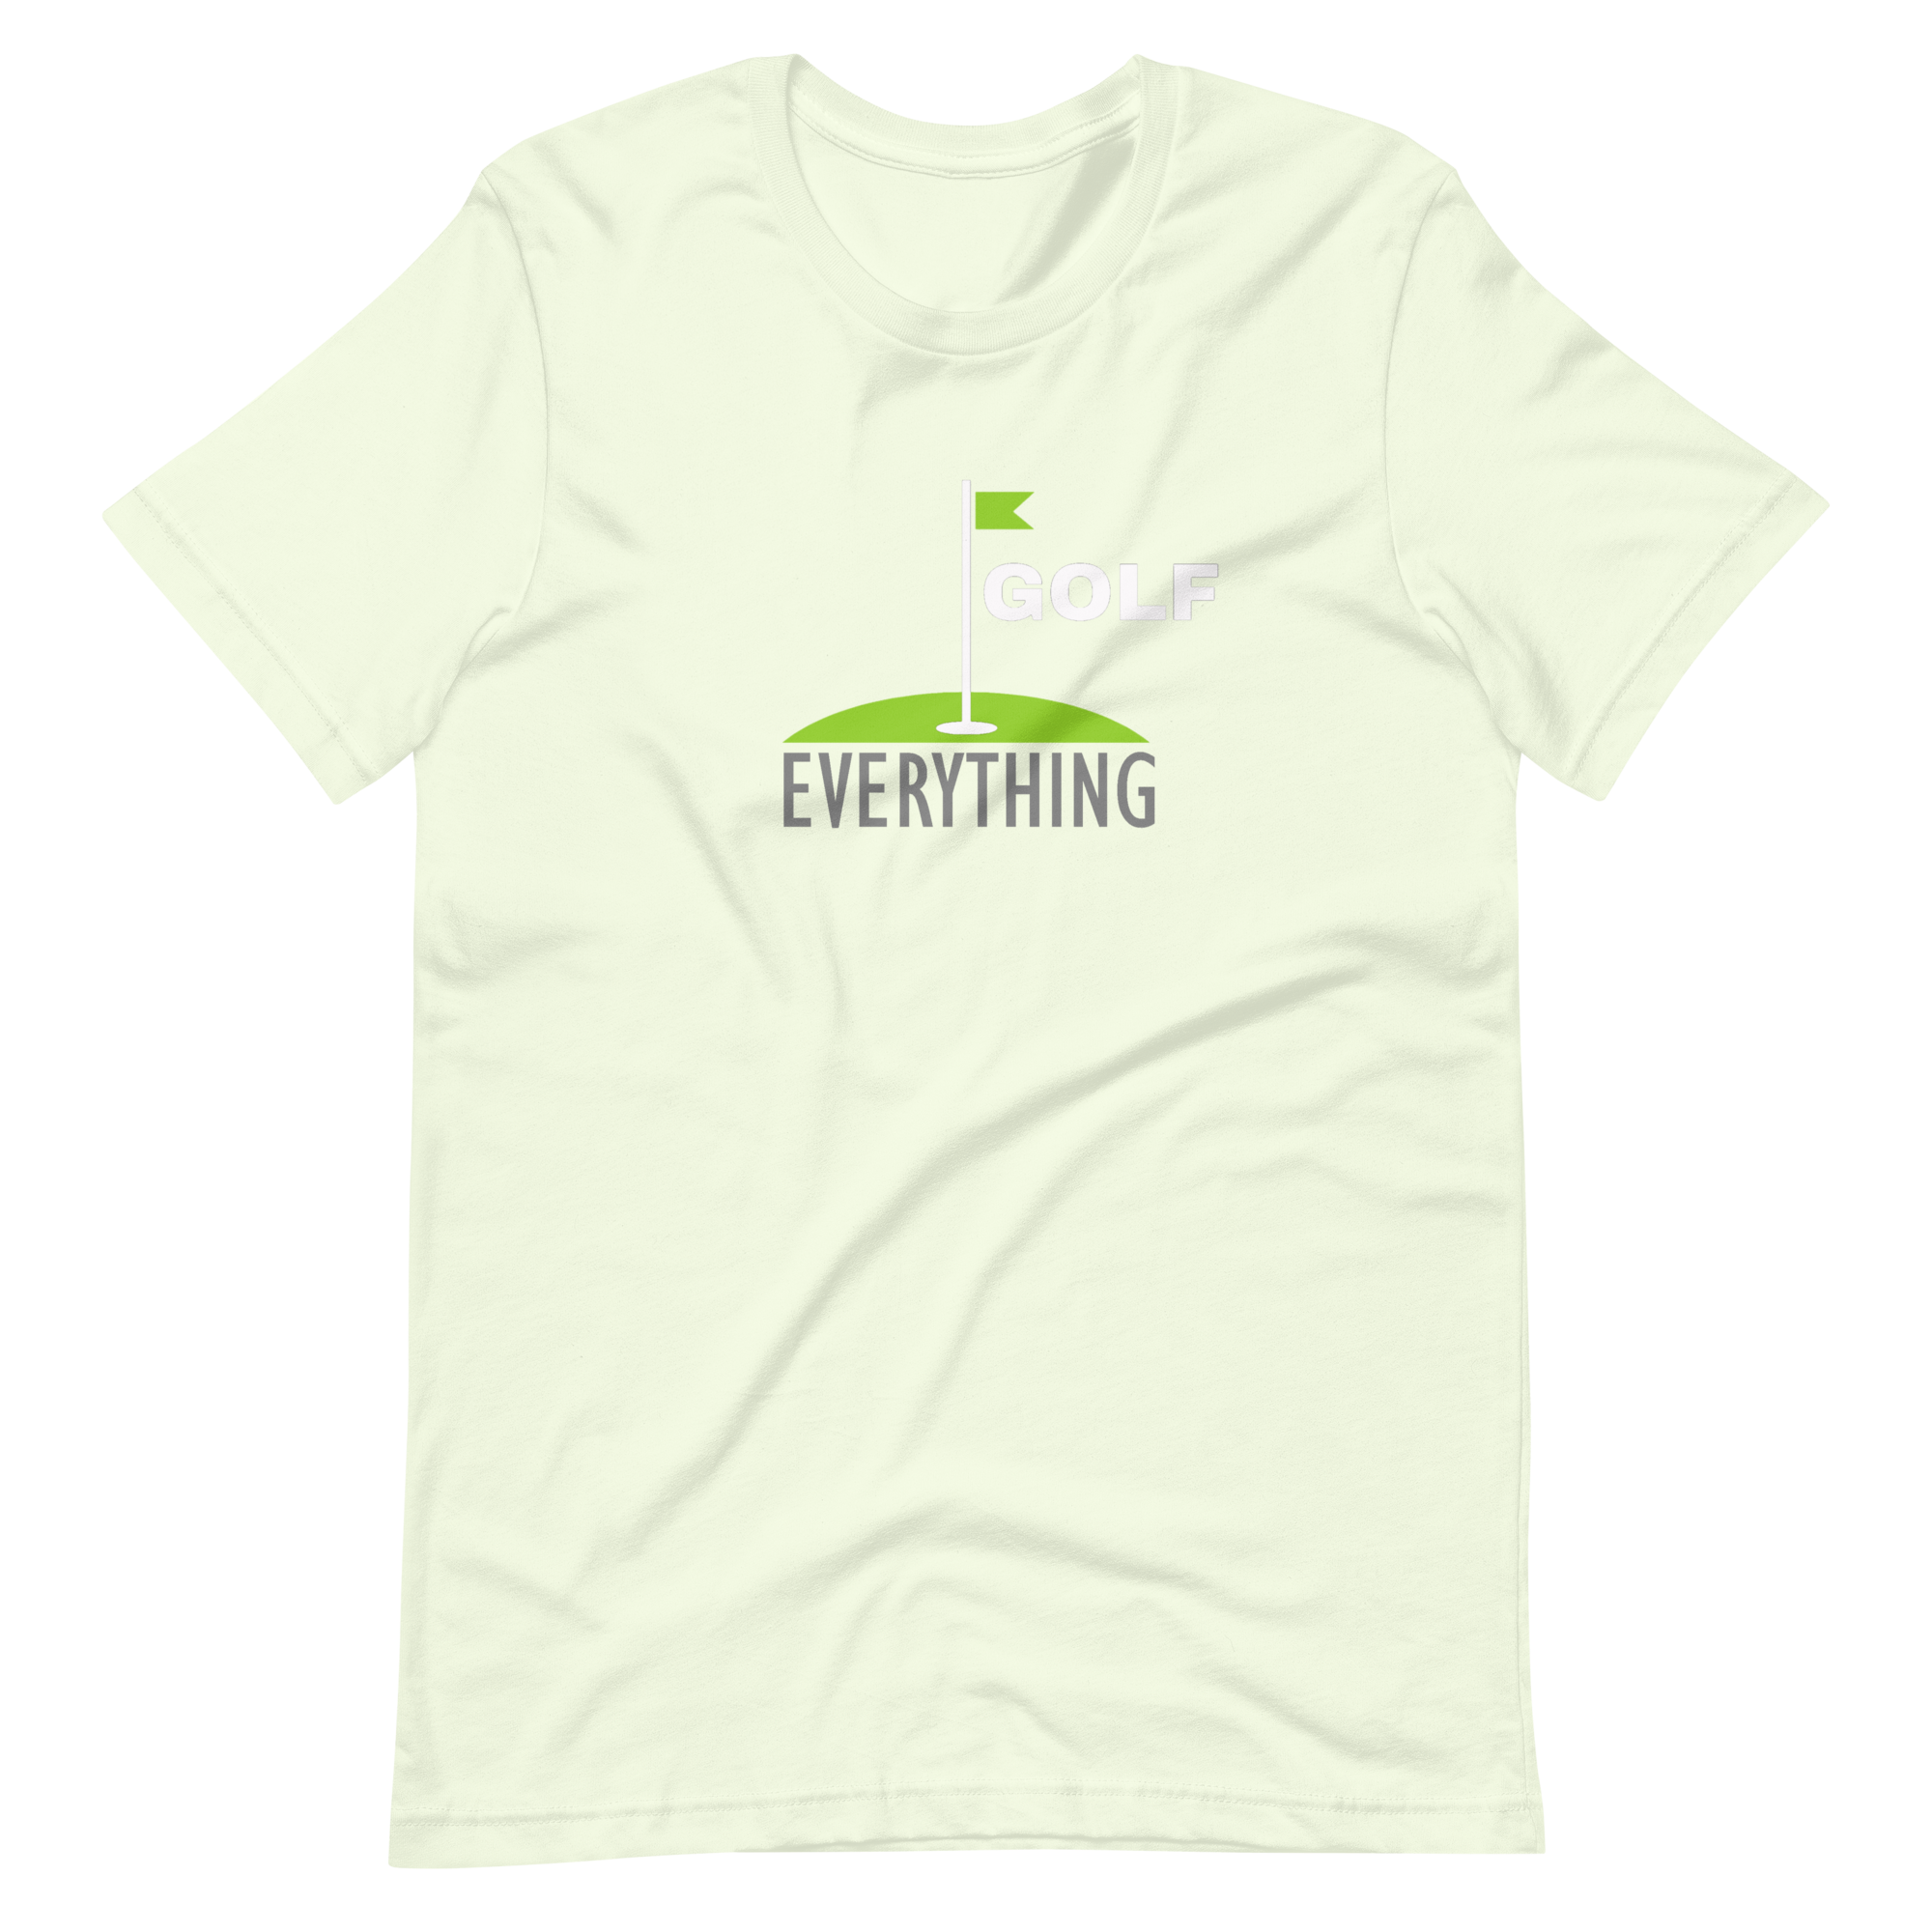 Golf Over Everything Tee